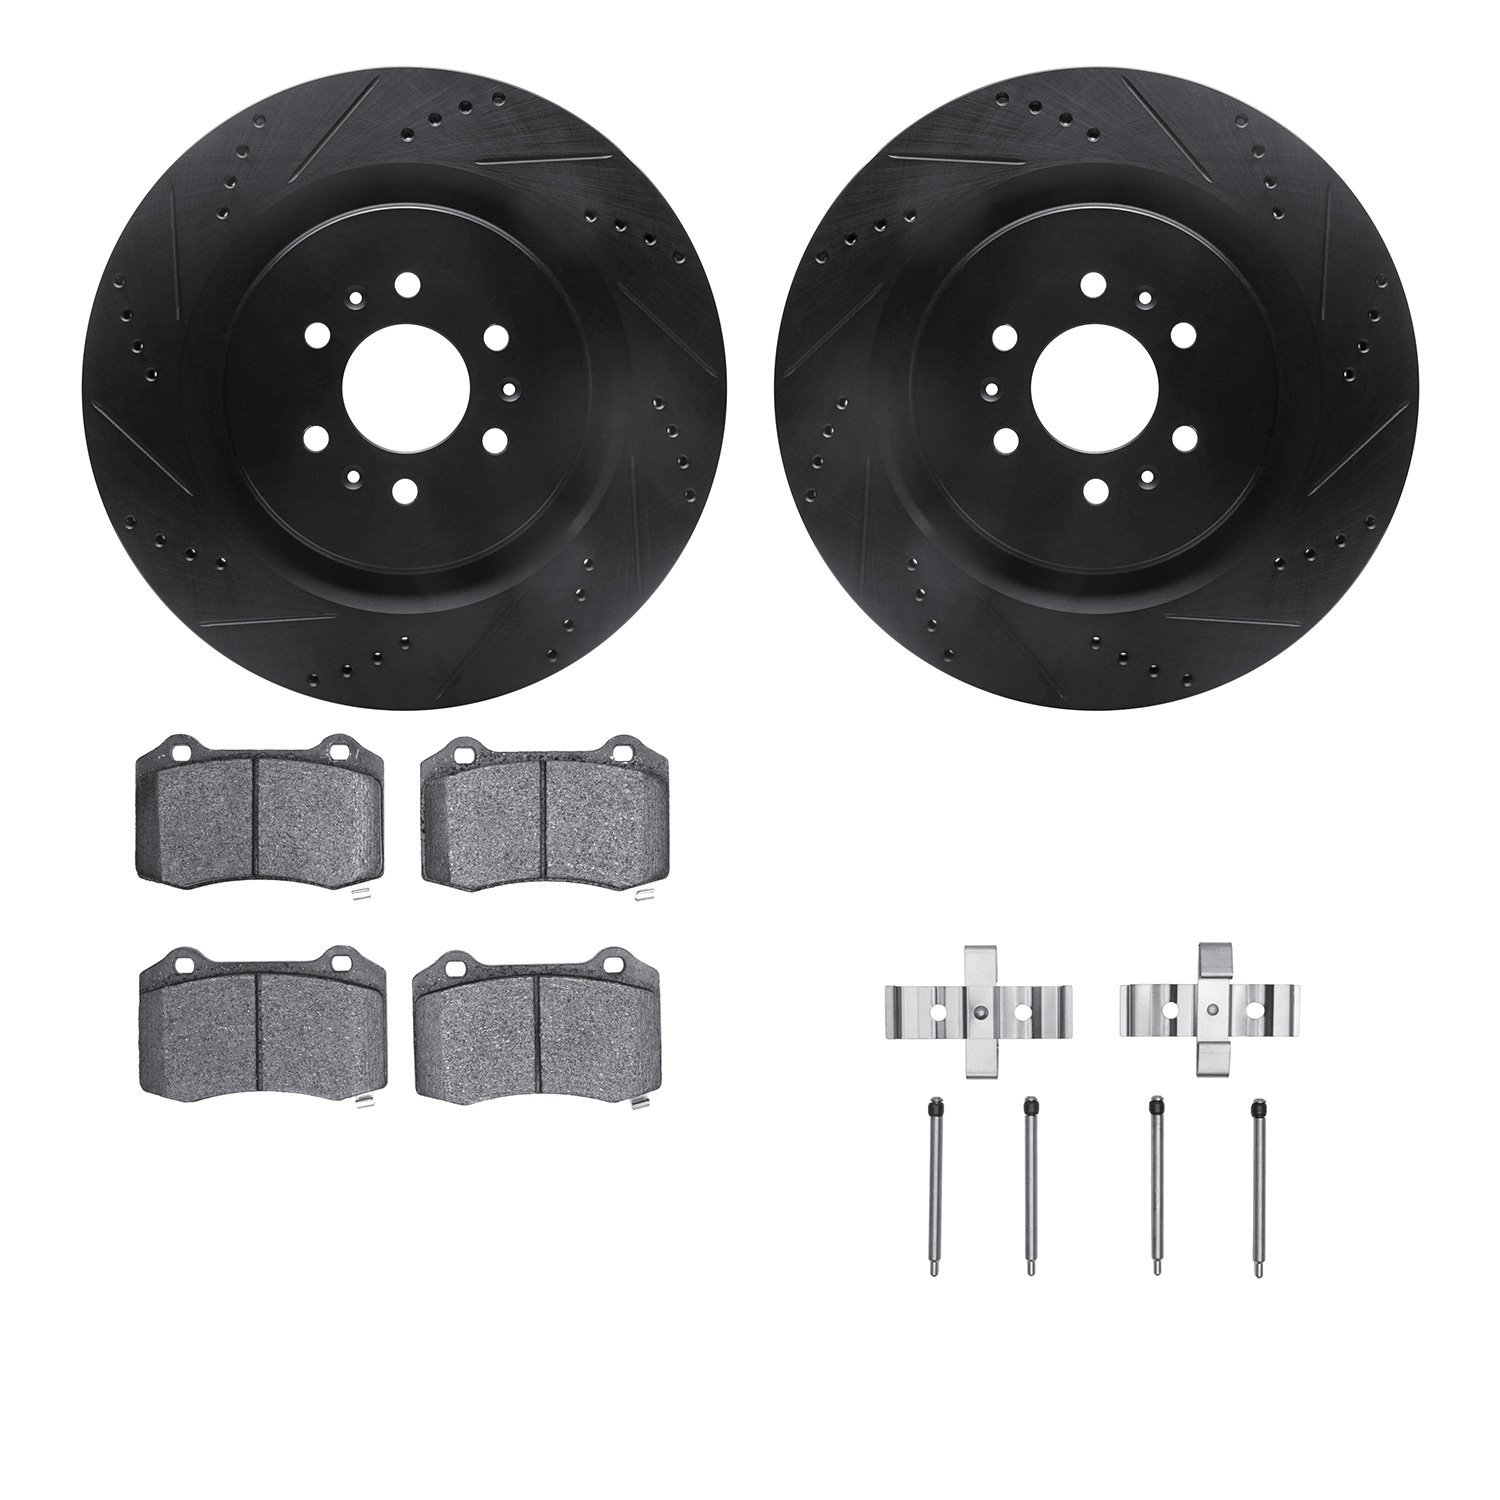 8412-46007 Drilled/Slotted Brake Rotors with Ultimate-Duty Brake Pads Kit & Hardware [Black], 2004-2011 GM, Position: Rear